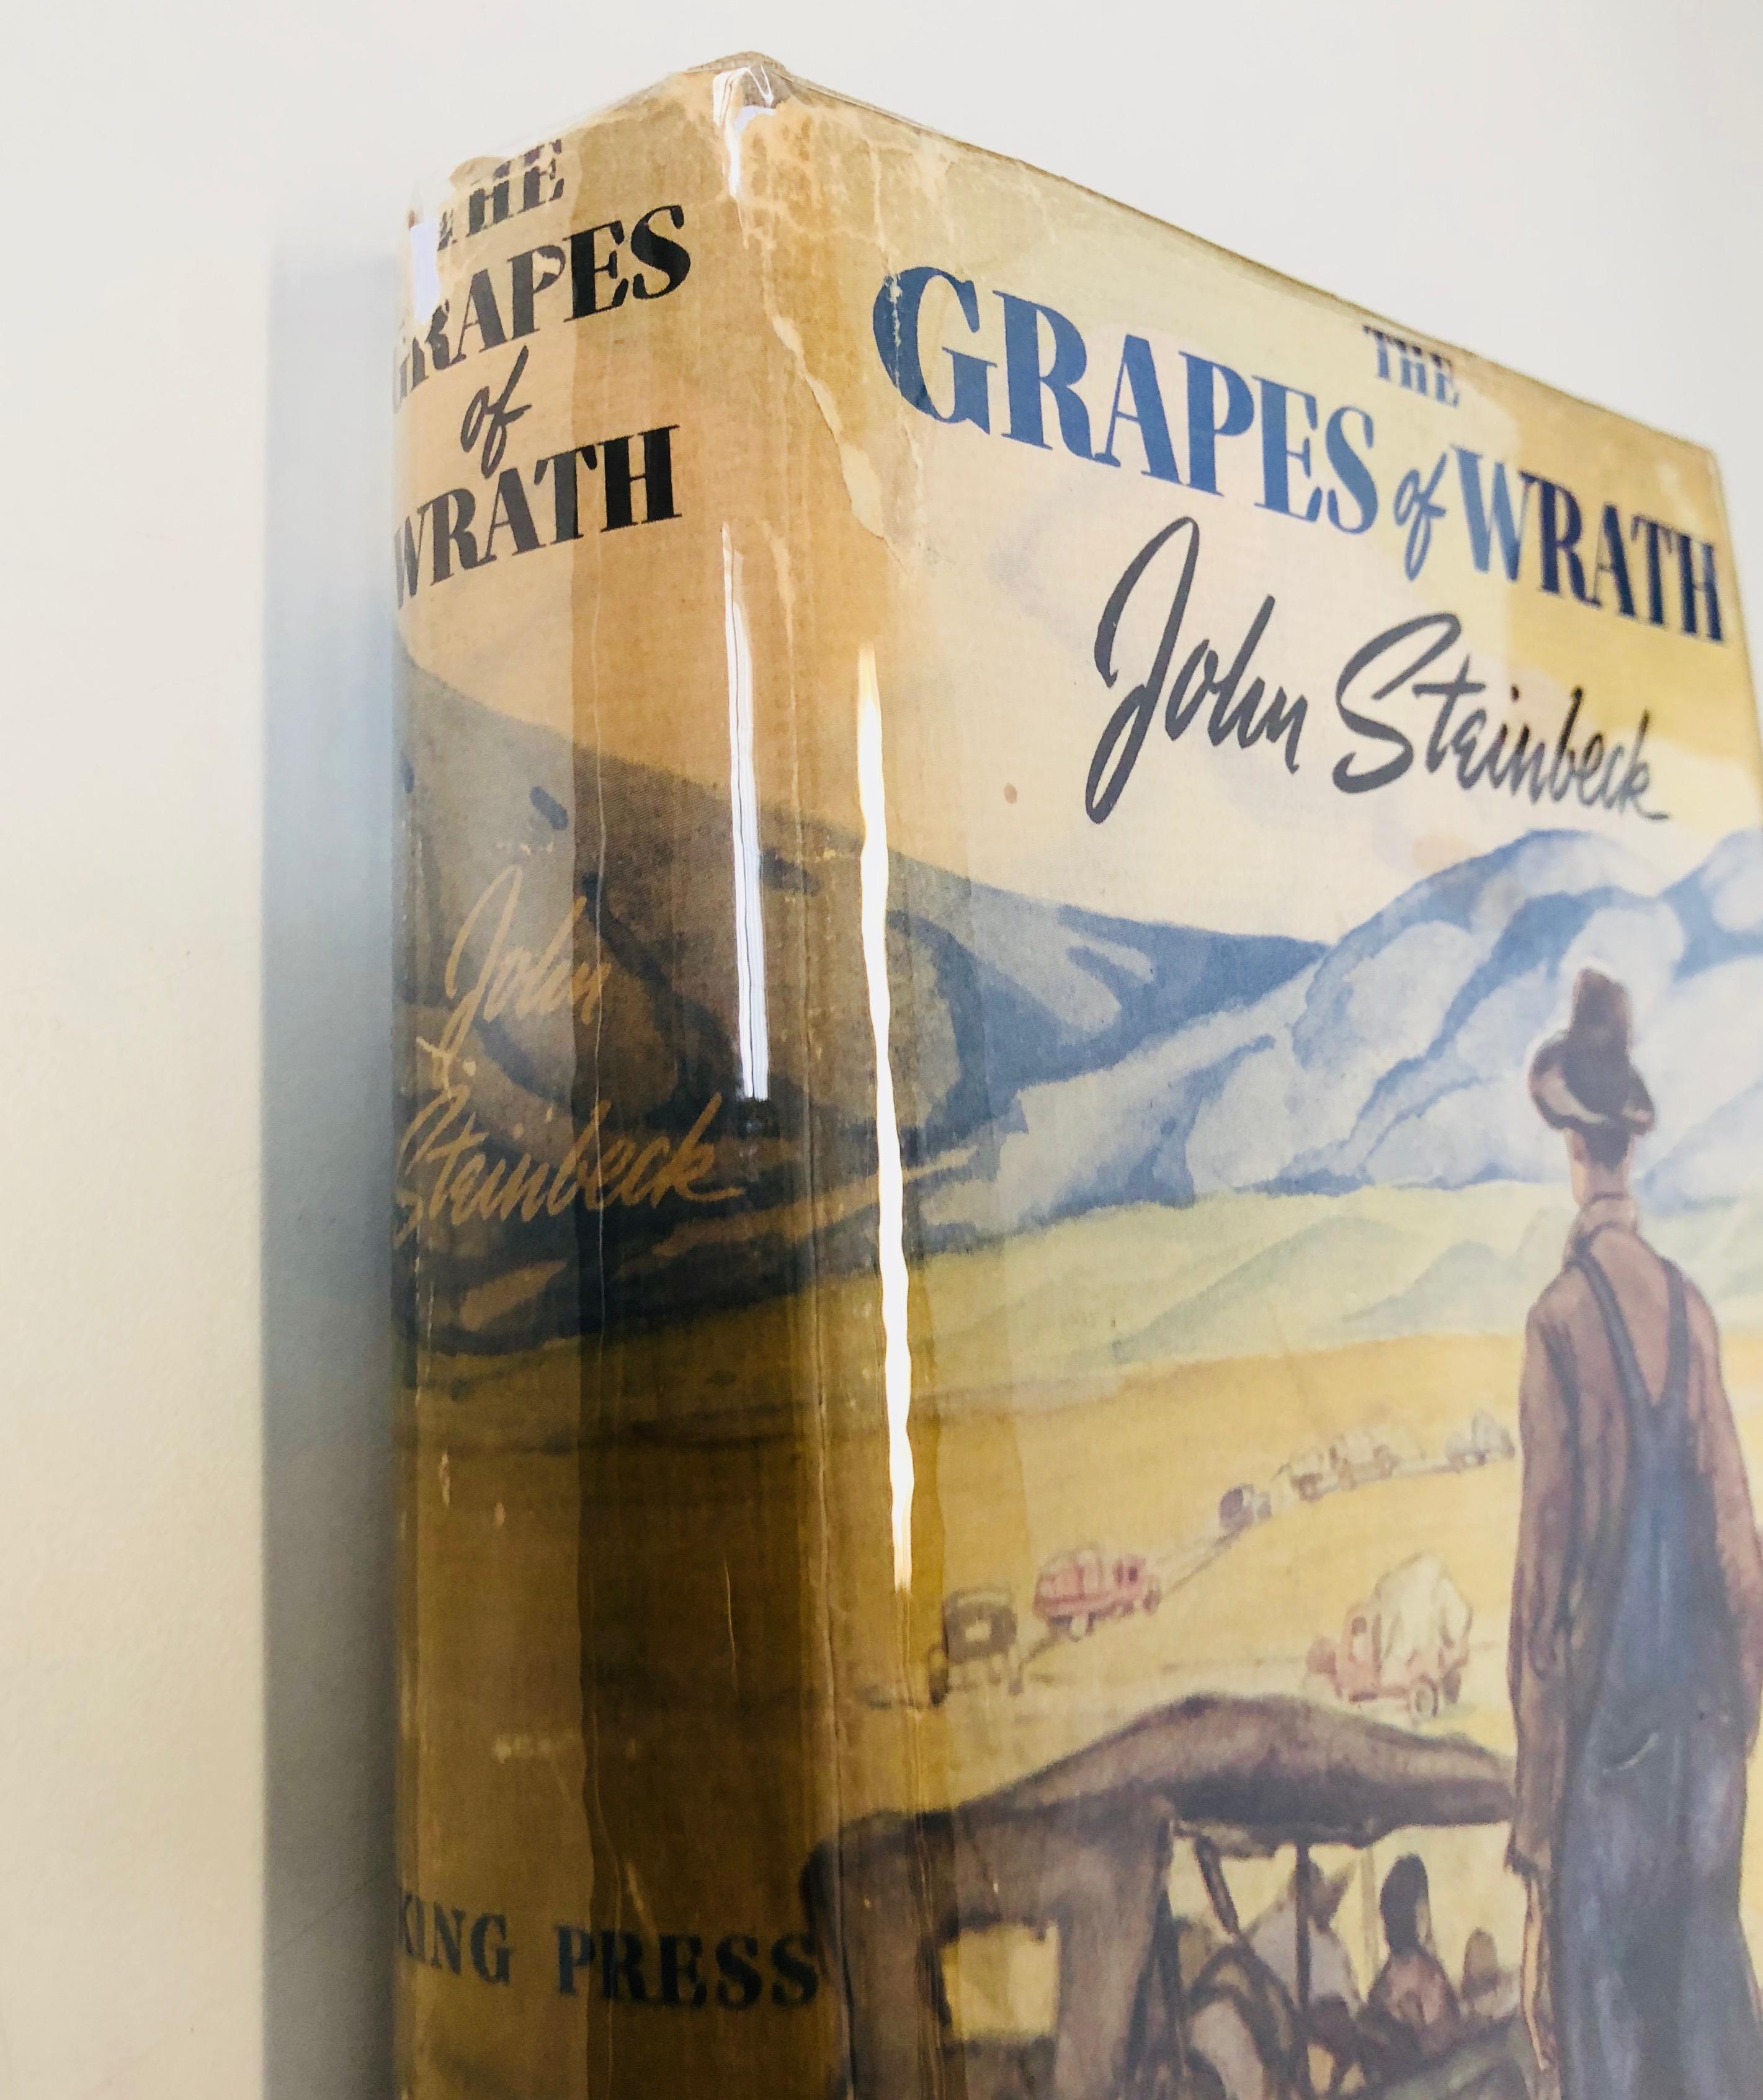 RARE GRAPES OF WRATH (1939) by John Steinbeck - First Edition - Early Printing